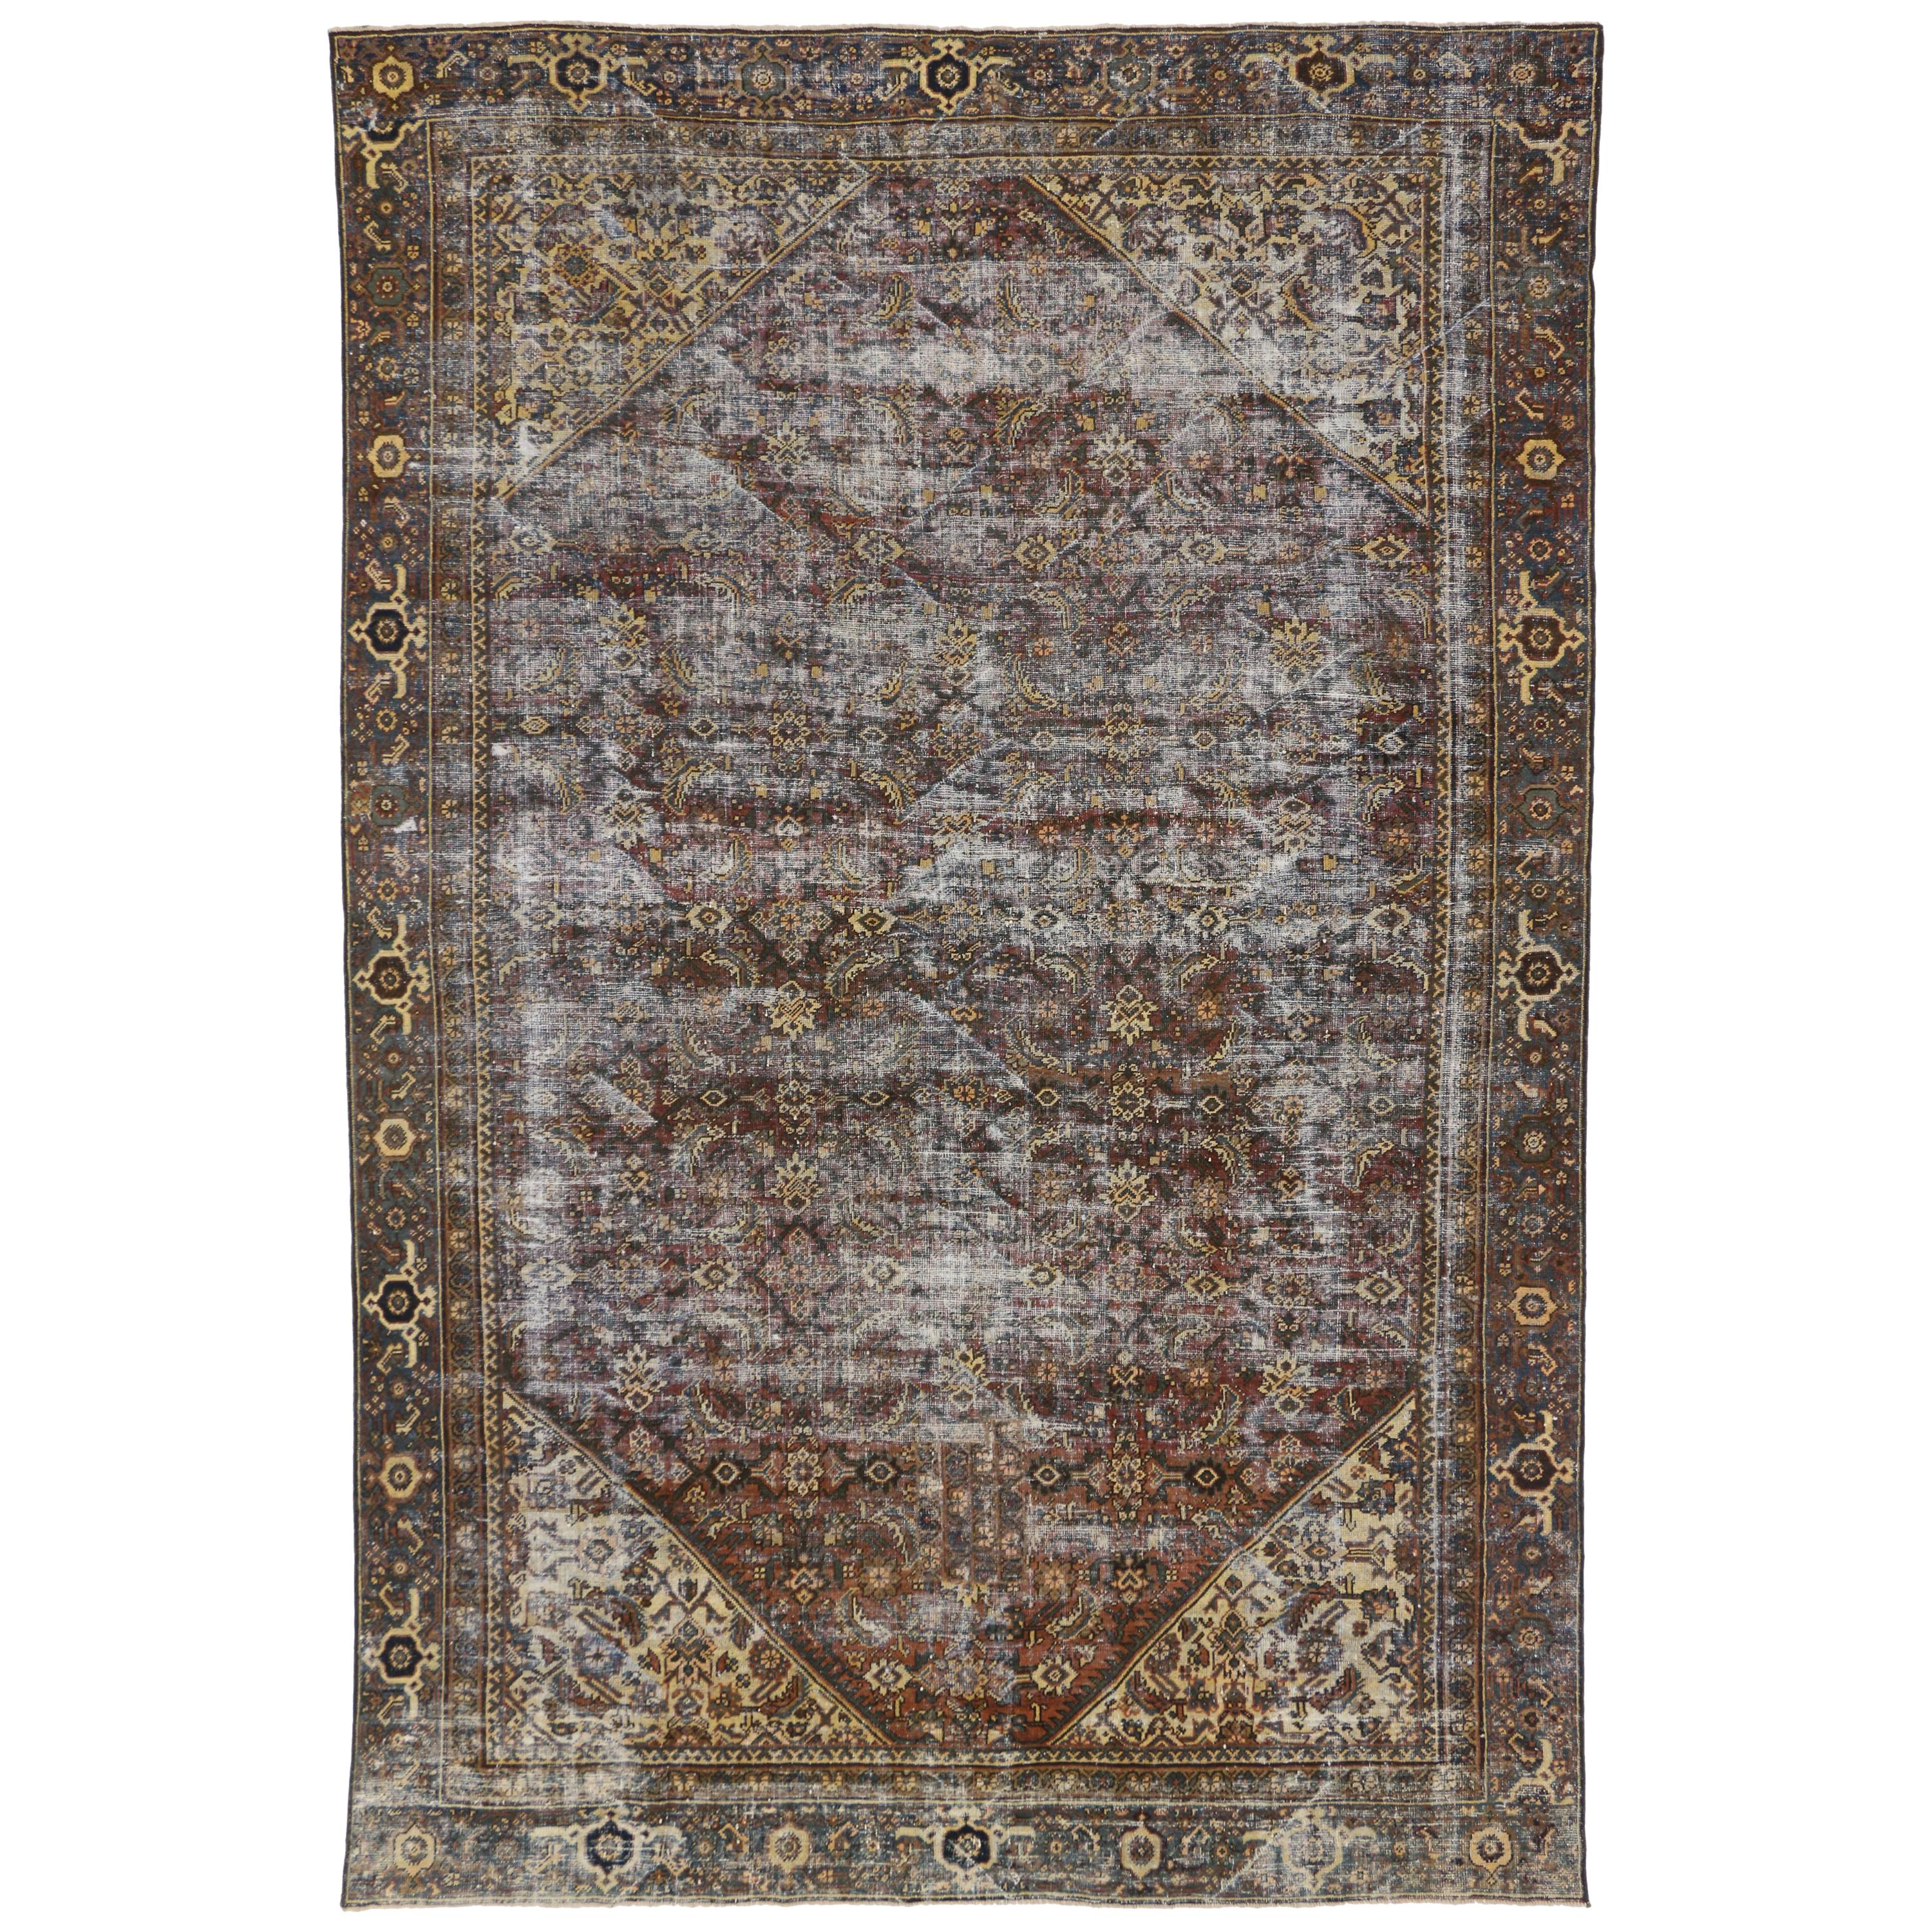  Distressed Antique Persian Mahal Rug with Traditional English Rustic Style 